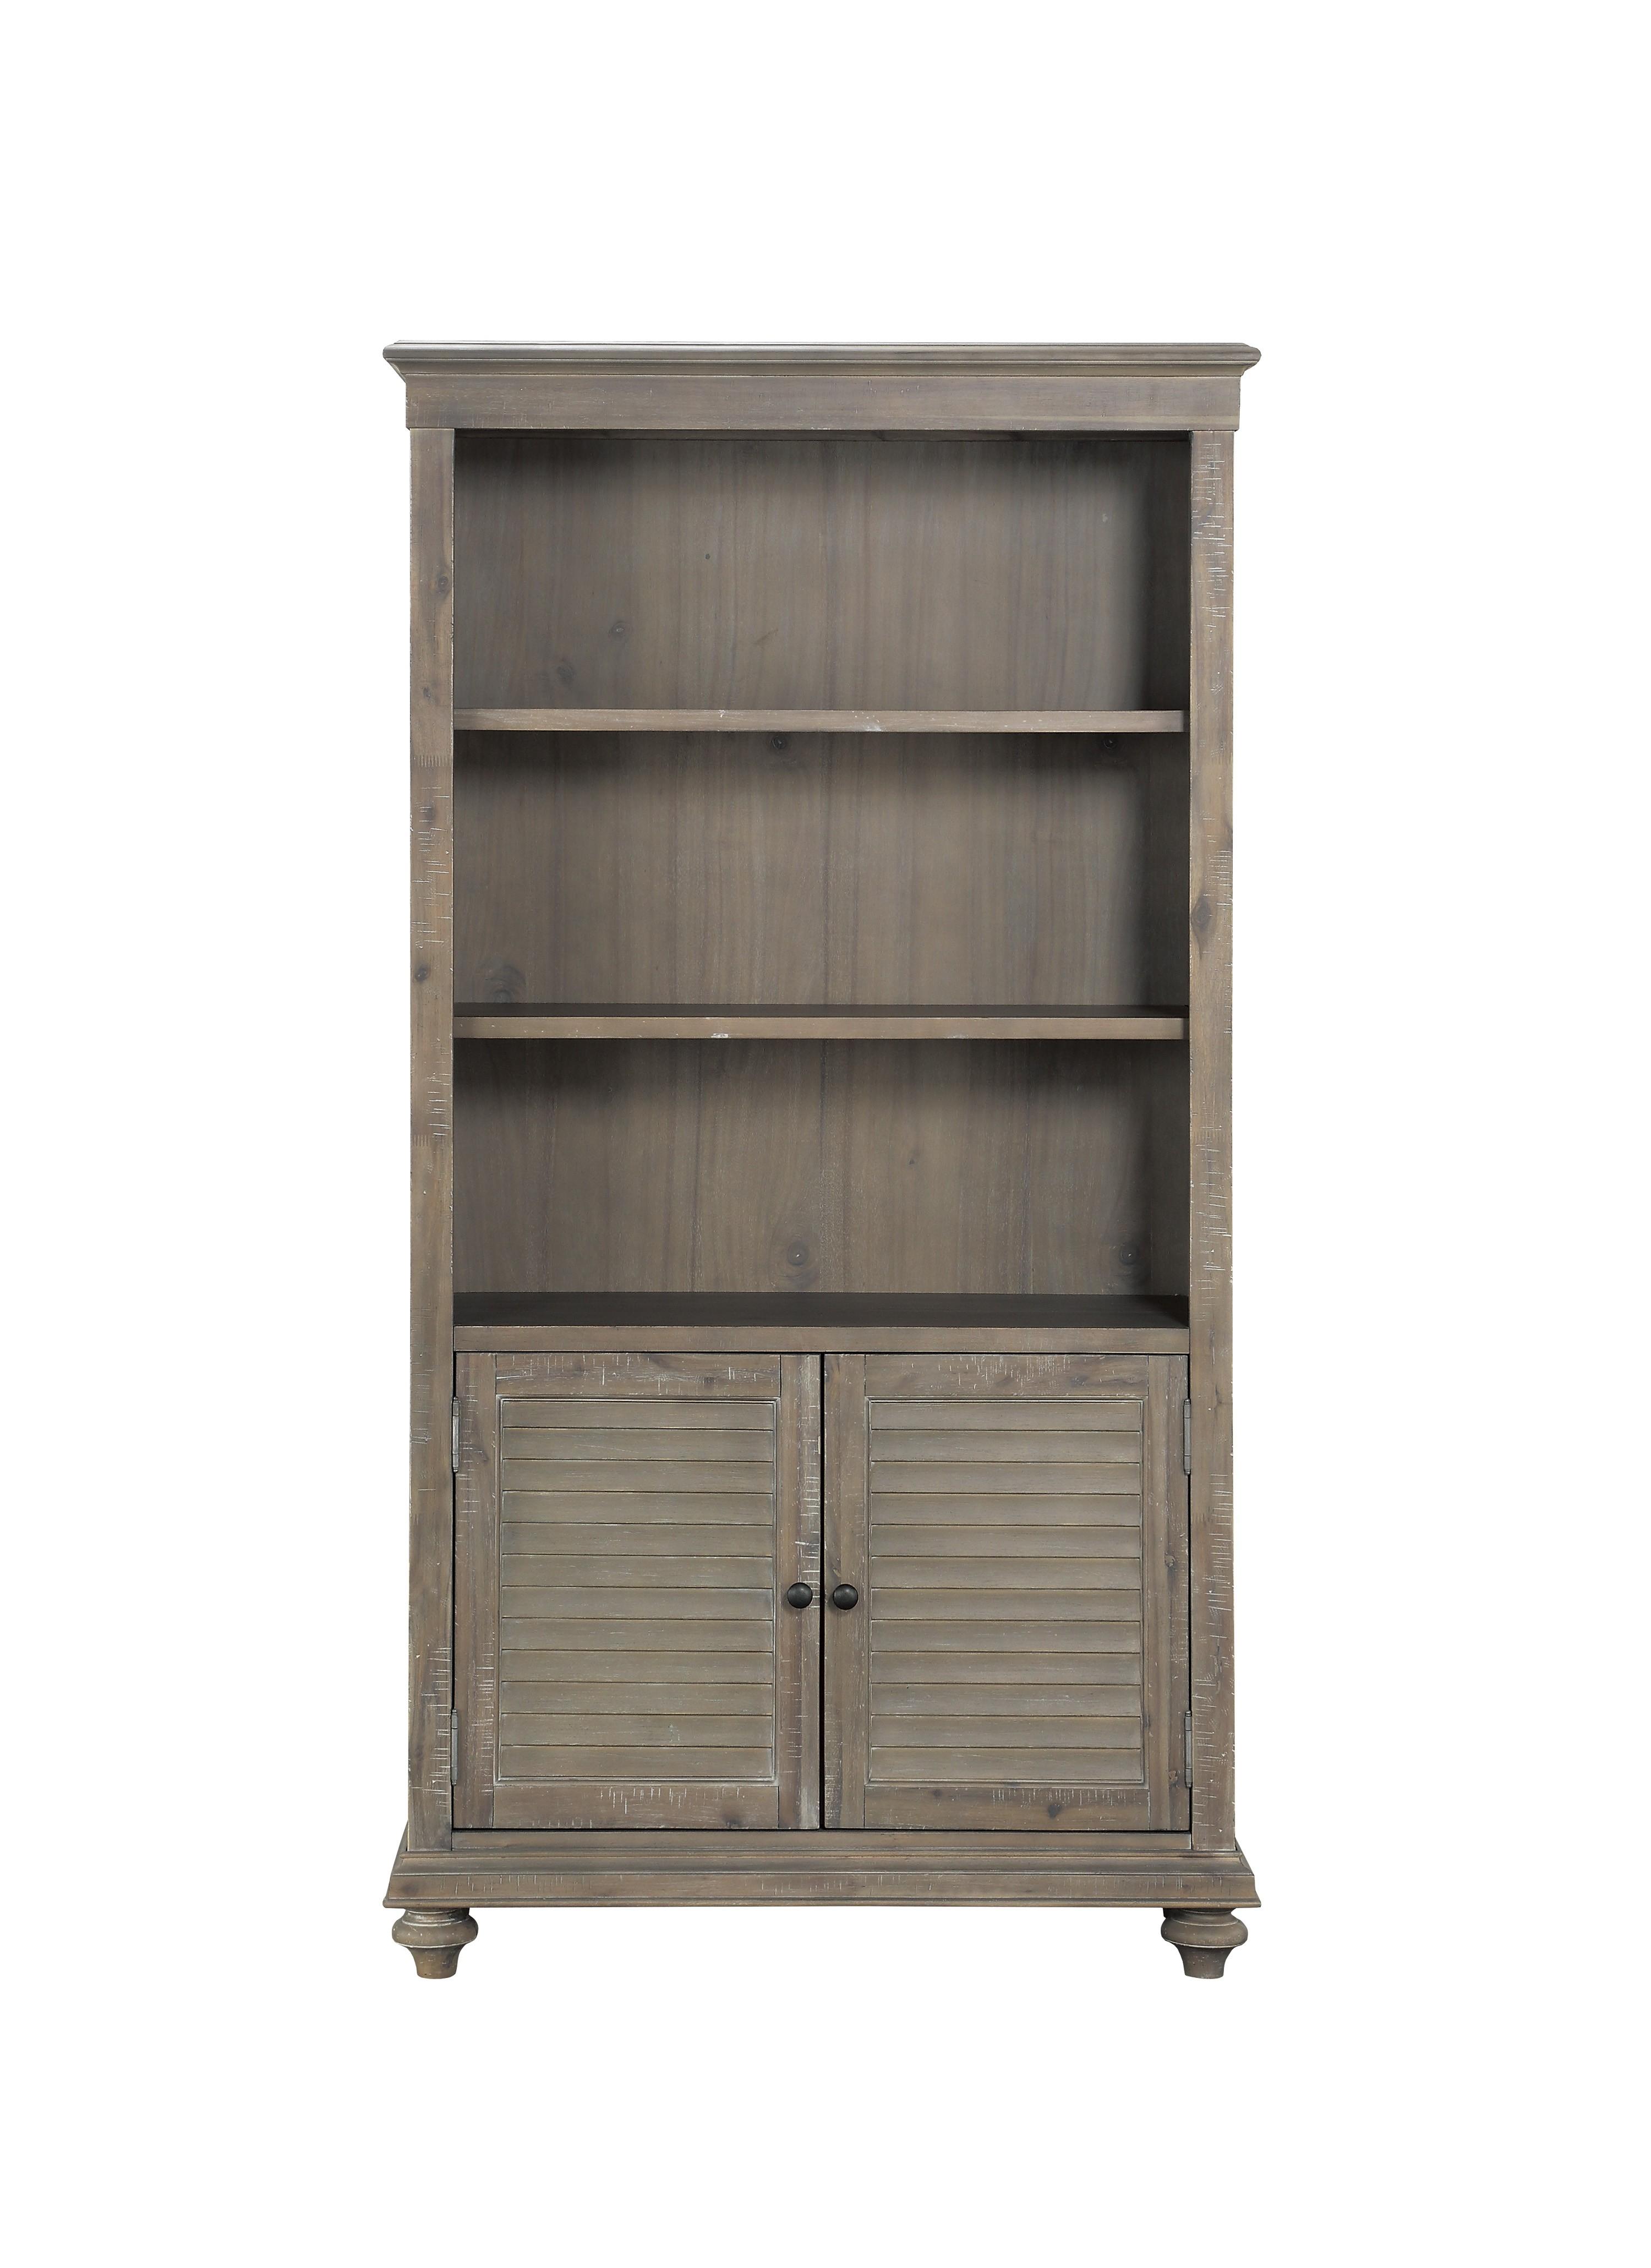 Transitional Bookcase 1689BR-18 Cardano 1689BR-18 in Light Brown 